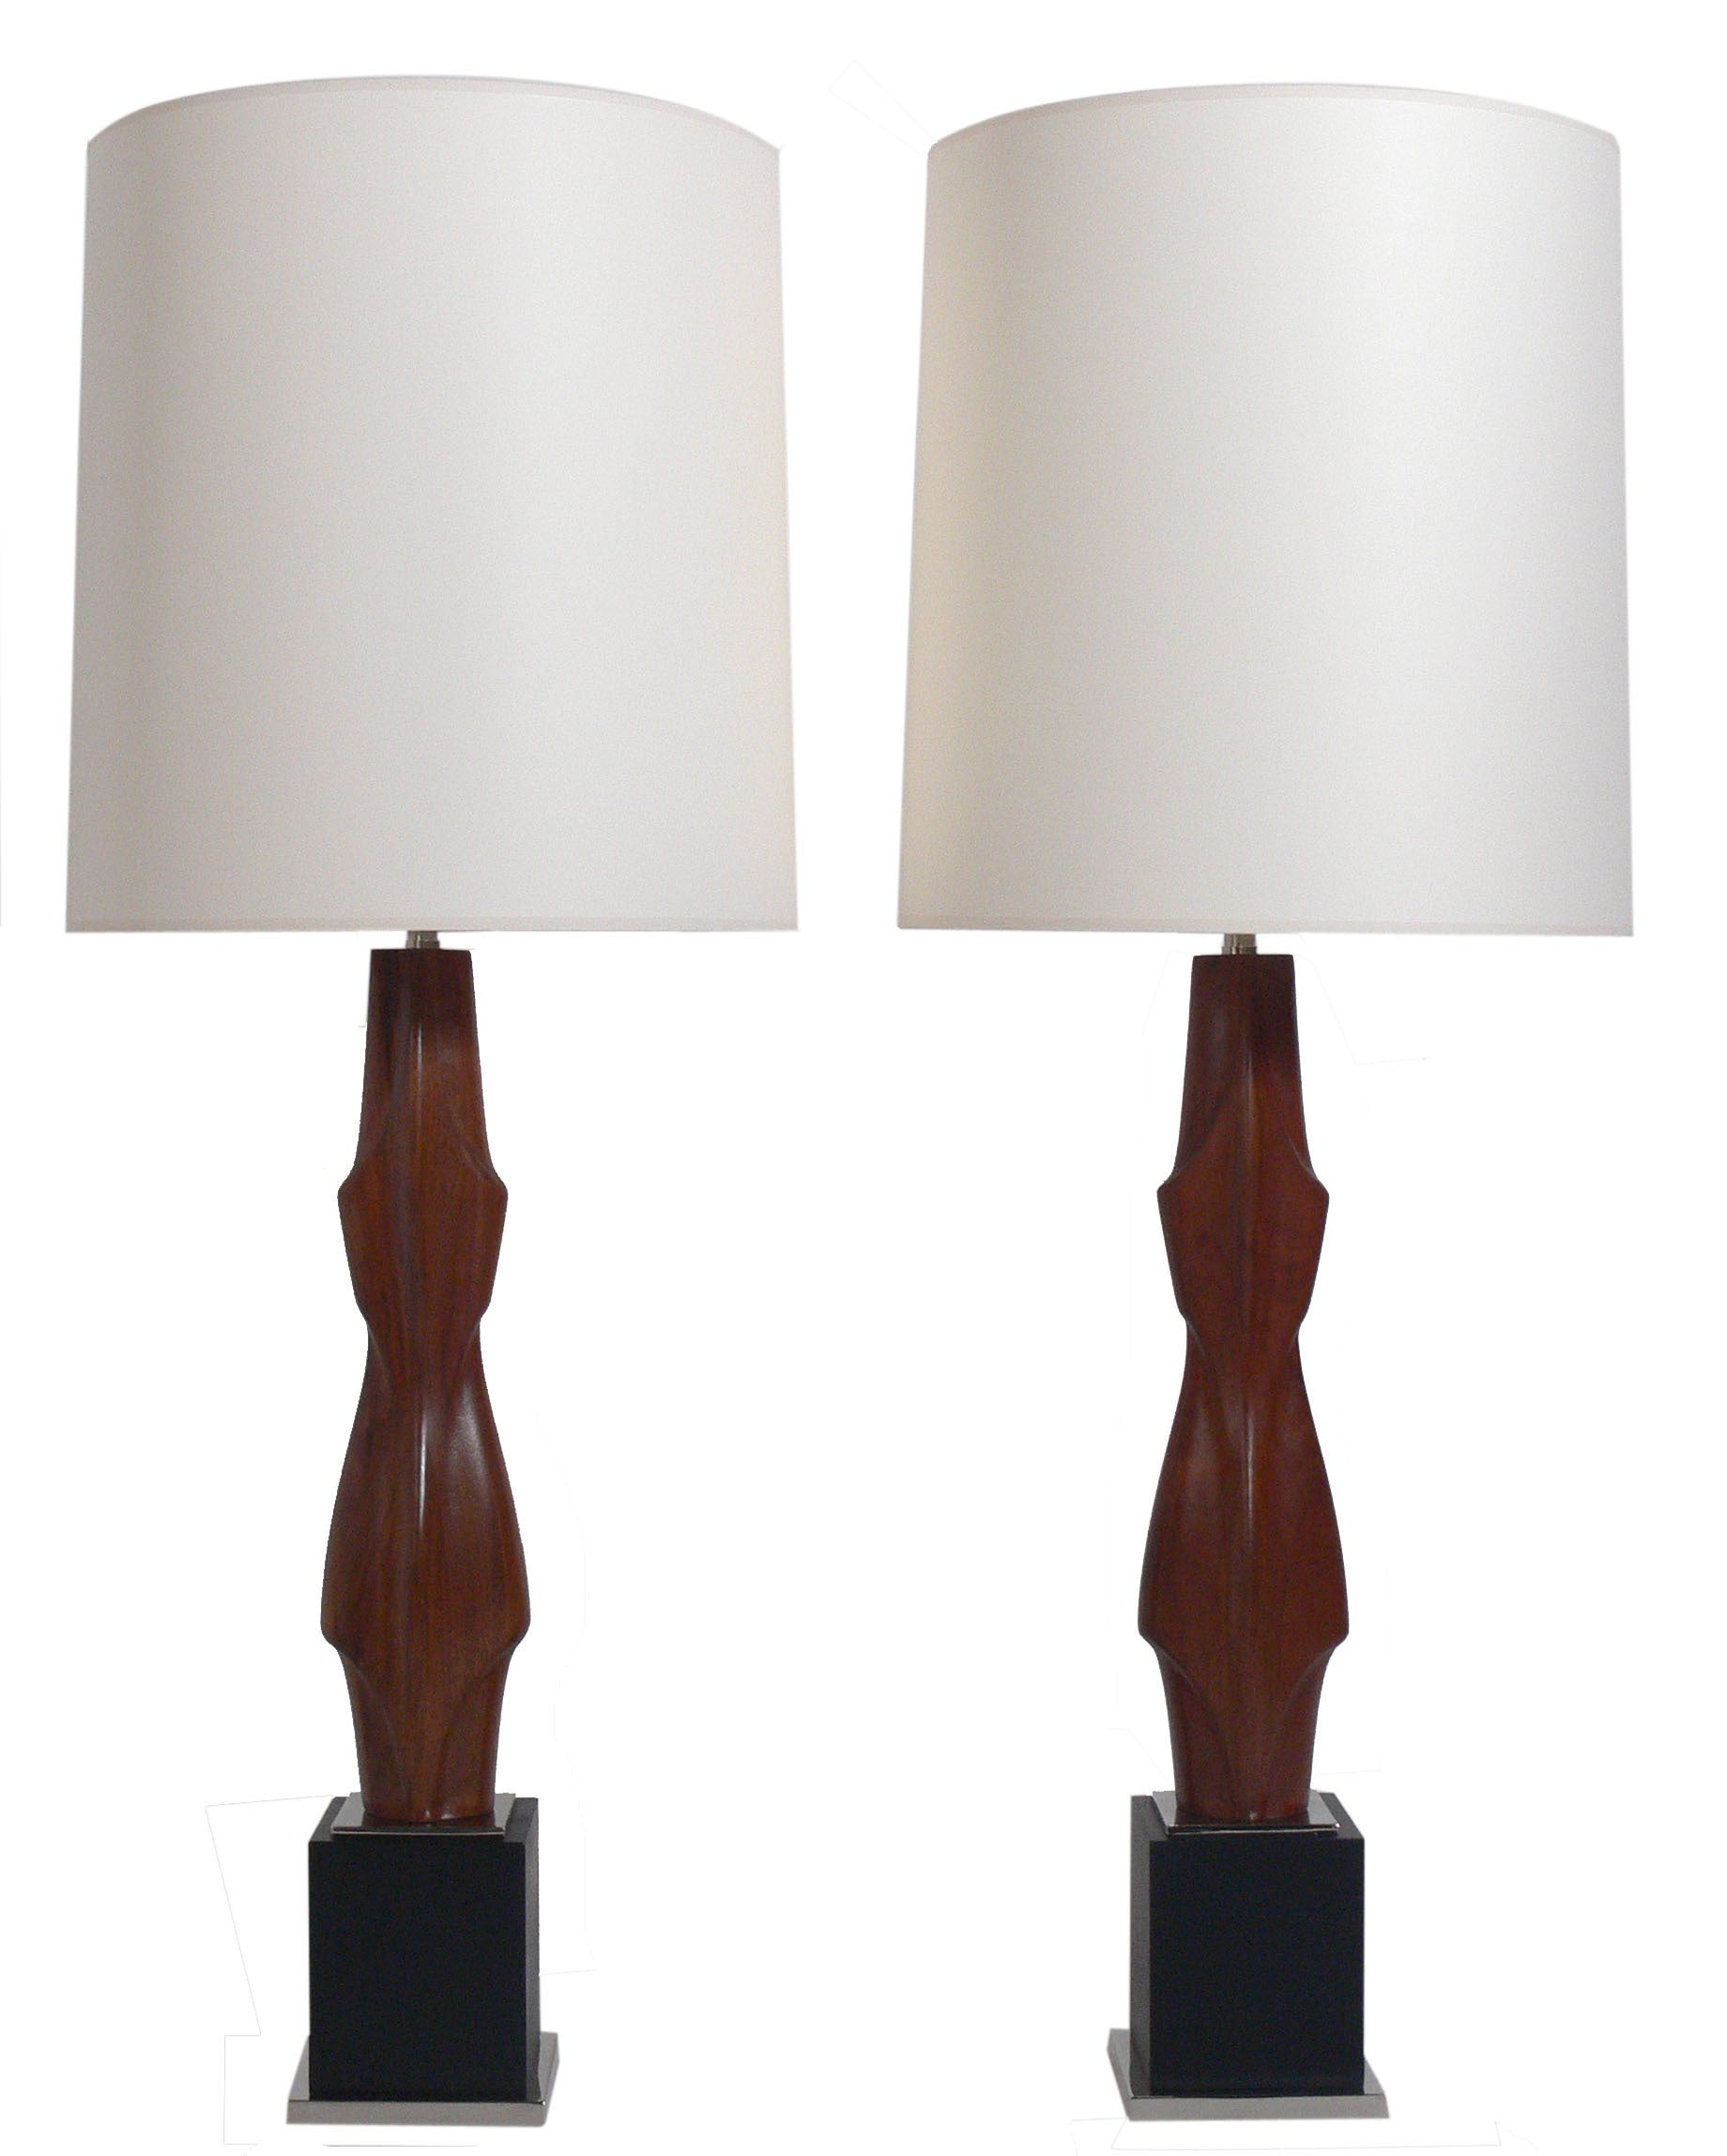 Pair of Sculptural Wooden Lamps by The Laurel Company